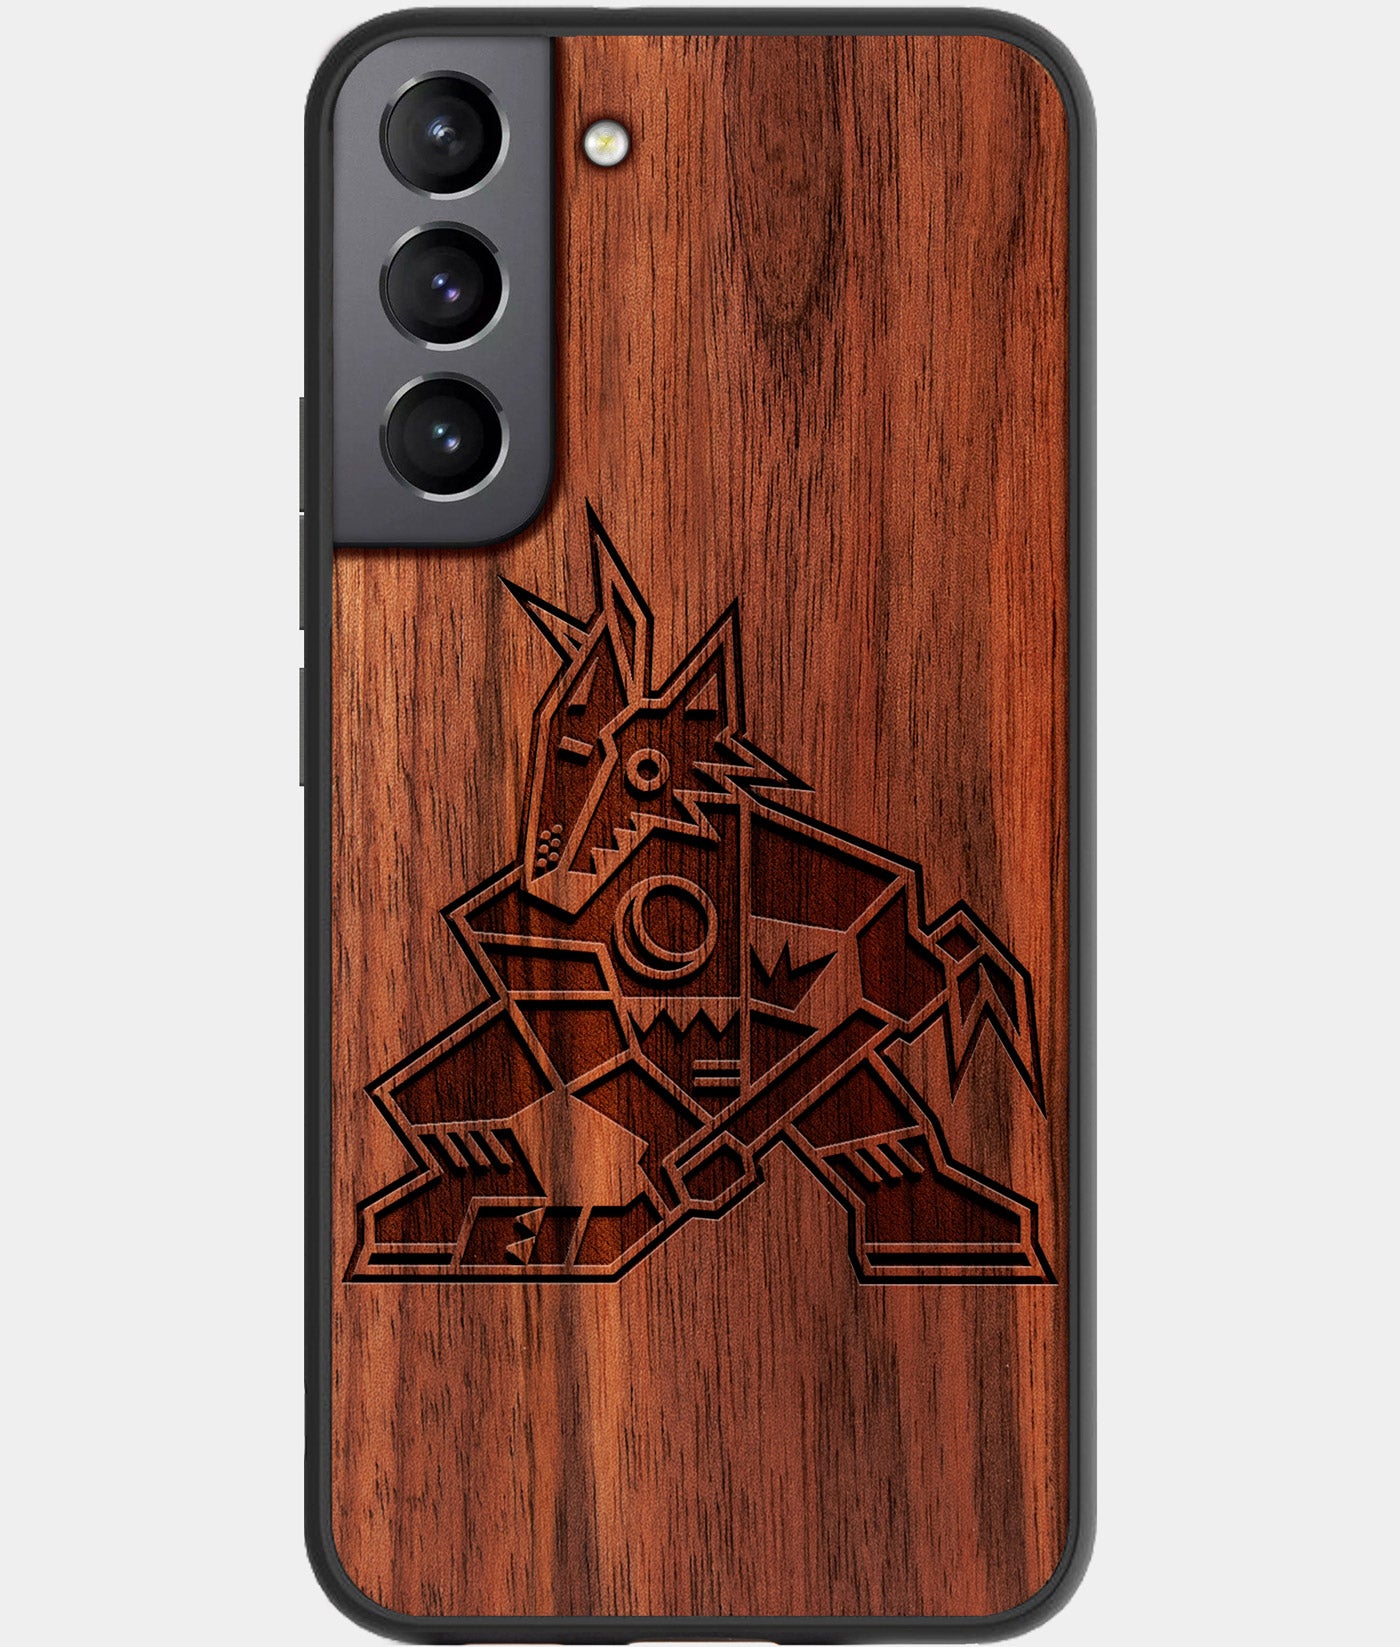 Best Walnut Wood Arizona Coyotes Galaxy S21 FE Case - Custom Engraved Cover - Engraved In Nature